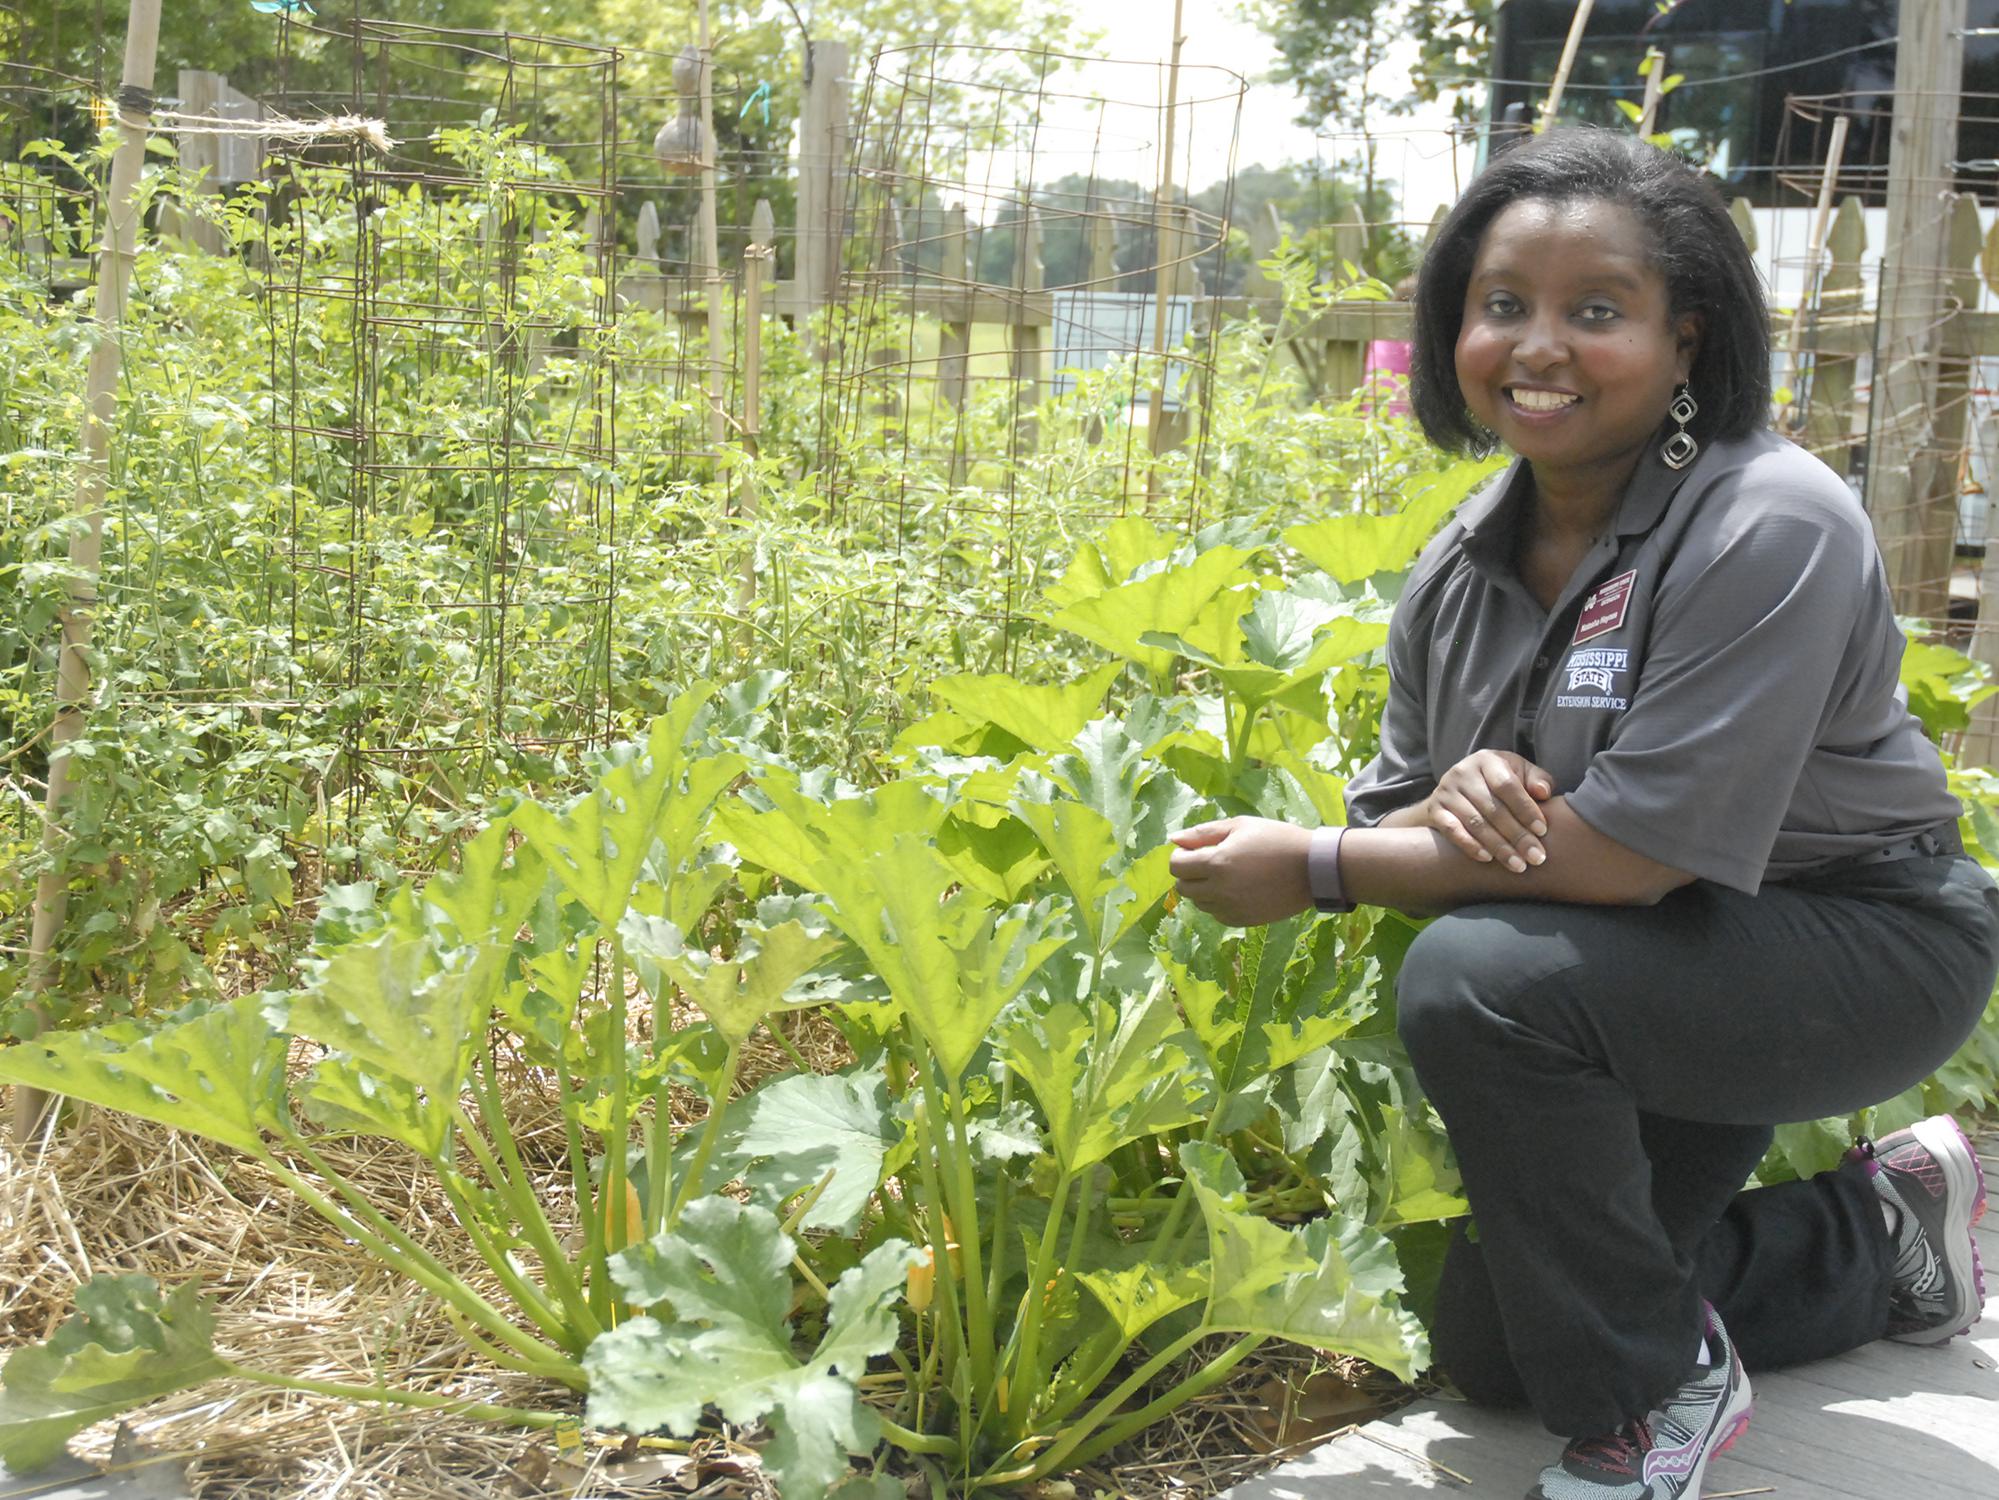 Natasha Haynes, Mississippi State University Extension agent in Rankin County, advocates choosing one local ingredient to spotlight in a menu, such as this squash growing at the Southern Heritage Garden at the Vicksburg National Military Park on June 13, 2017. (Photo by MSU Extension Service/Bonnie Coblentz)